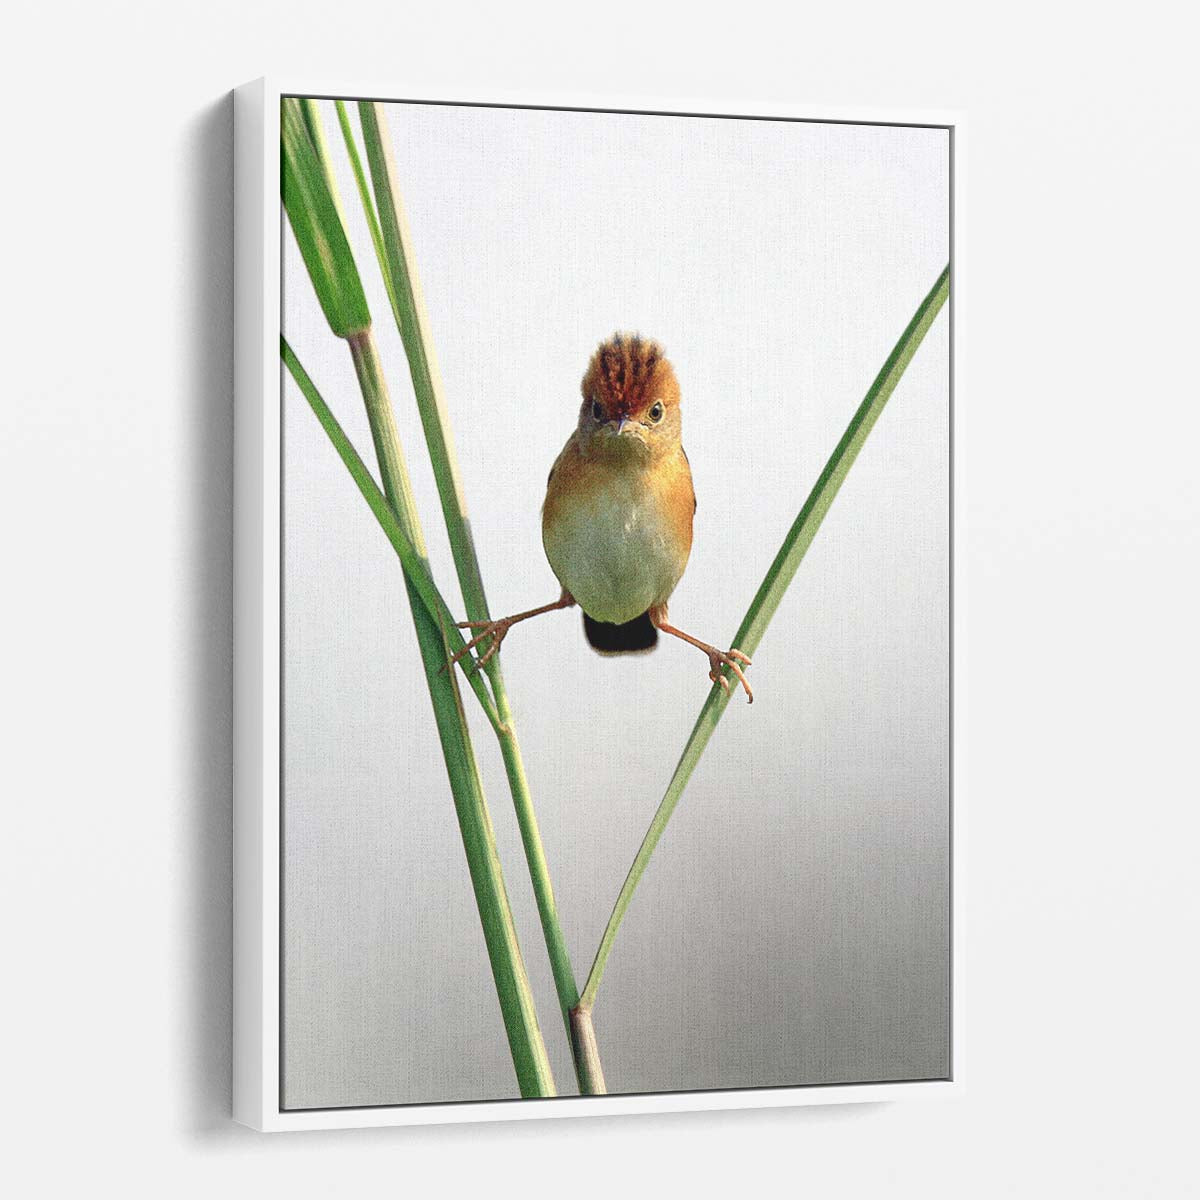 Furious Kung Fu Bird, Humorous Minimalistic Wildlife Photography, Jakarta by Luxuriance Designs, made in USA